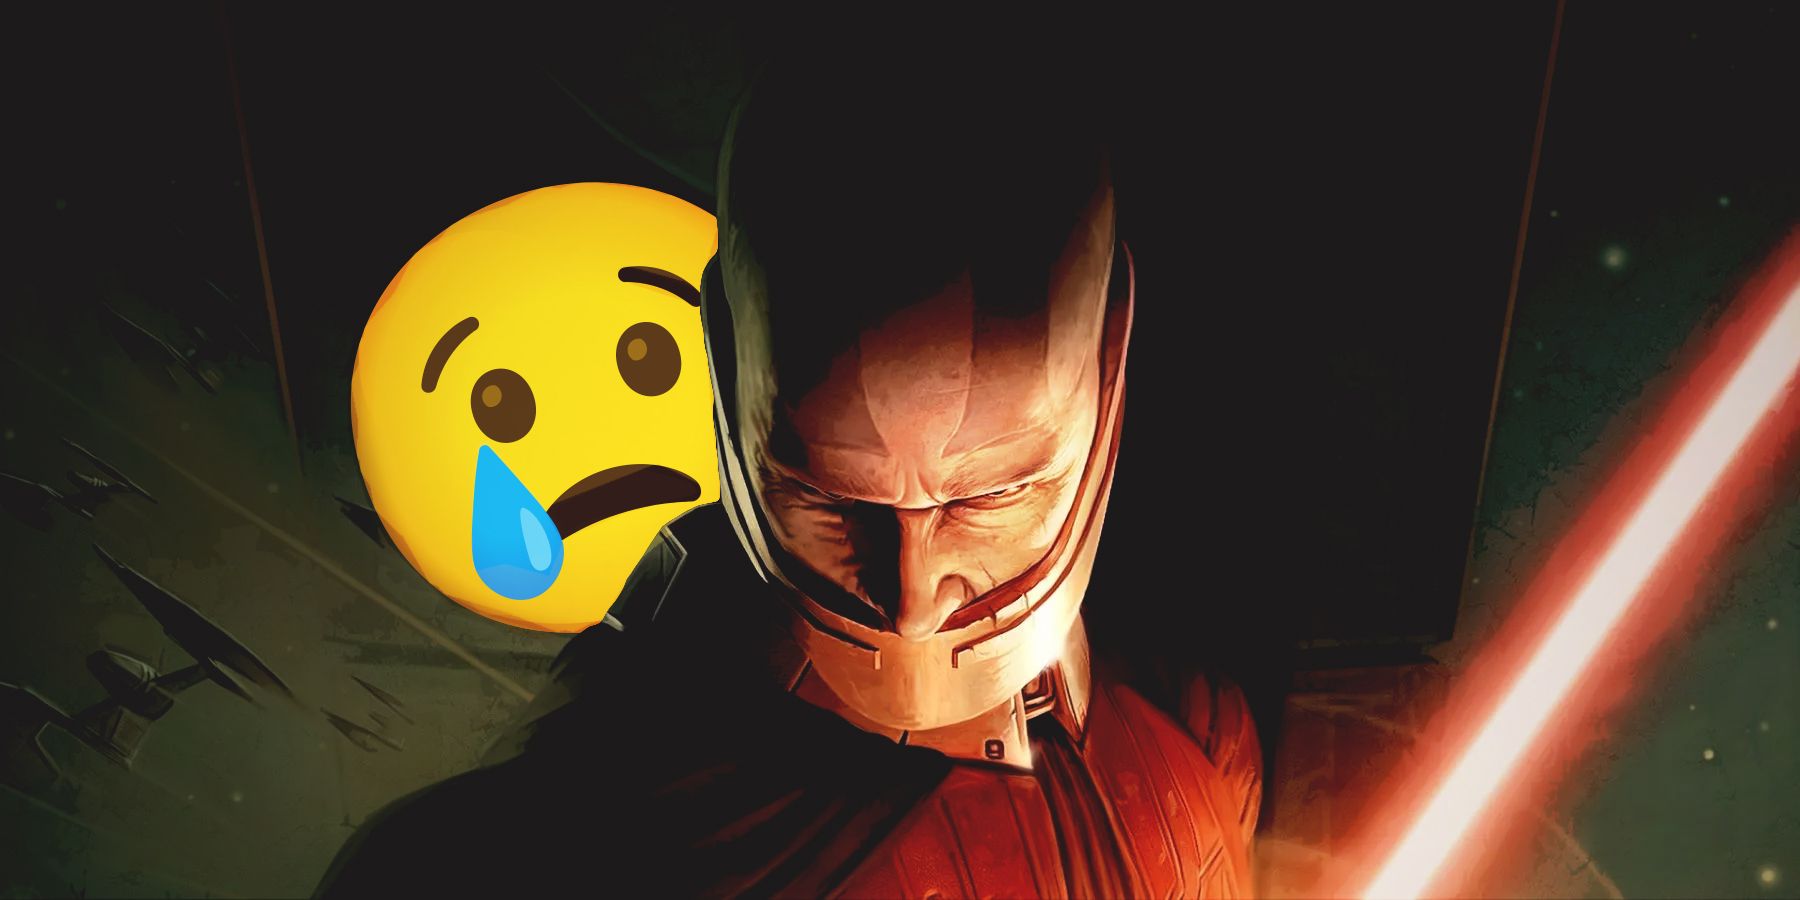 Star Wars Knights of the Old Republic KOTOR Malak with Crying Face emoji